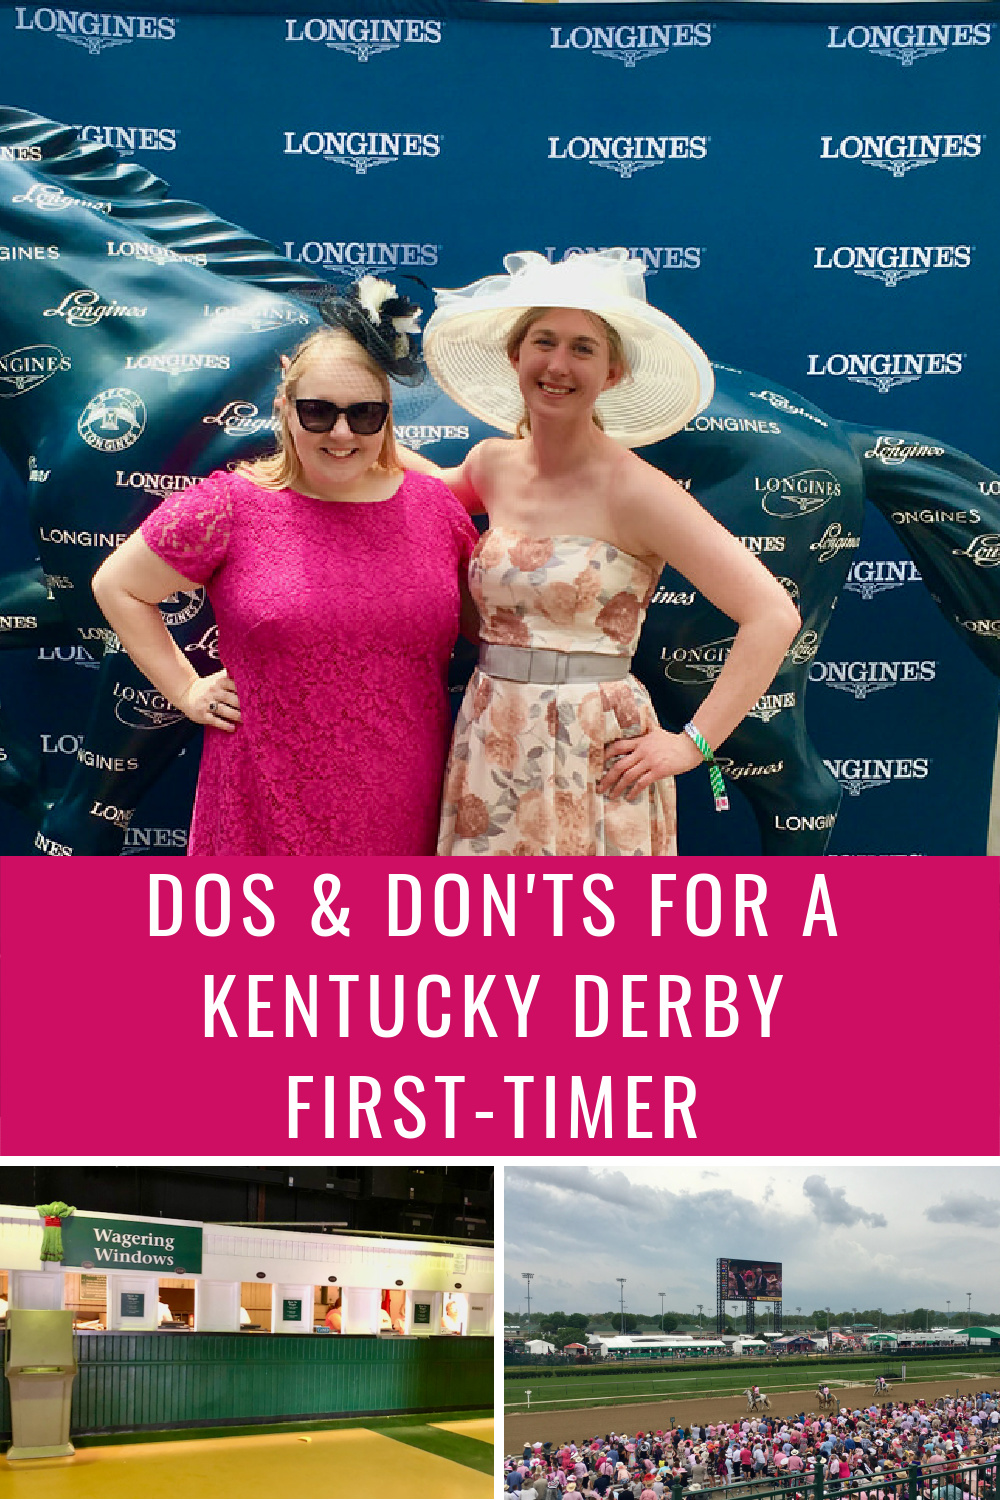 Attending the Kentucky Derby FirstTimer Need to Know Dos and Don'ts